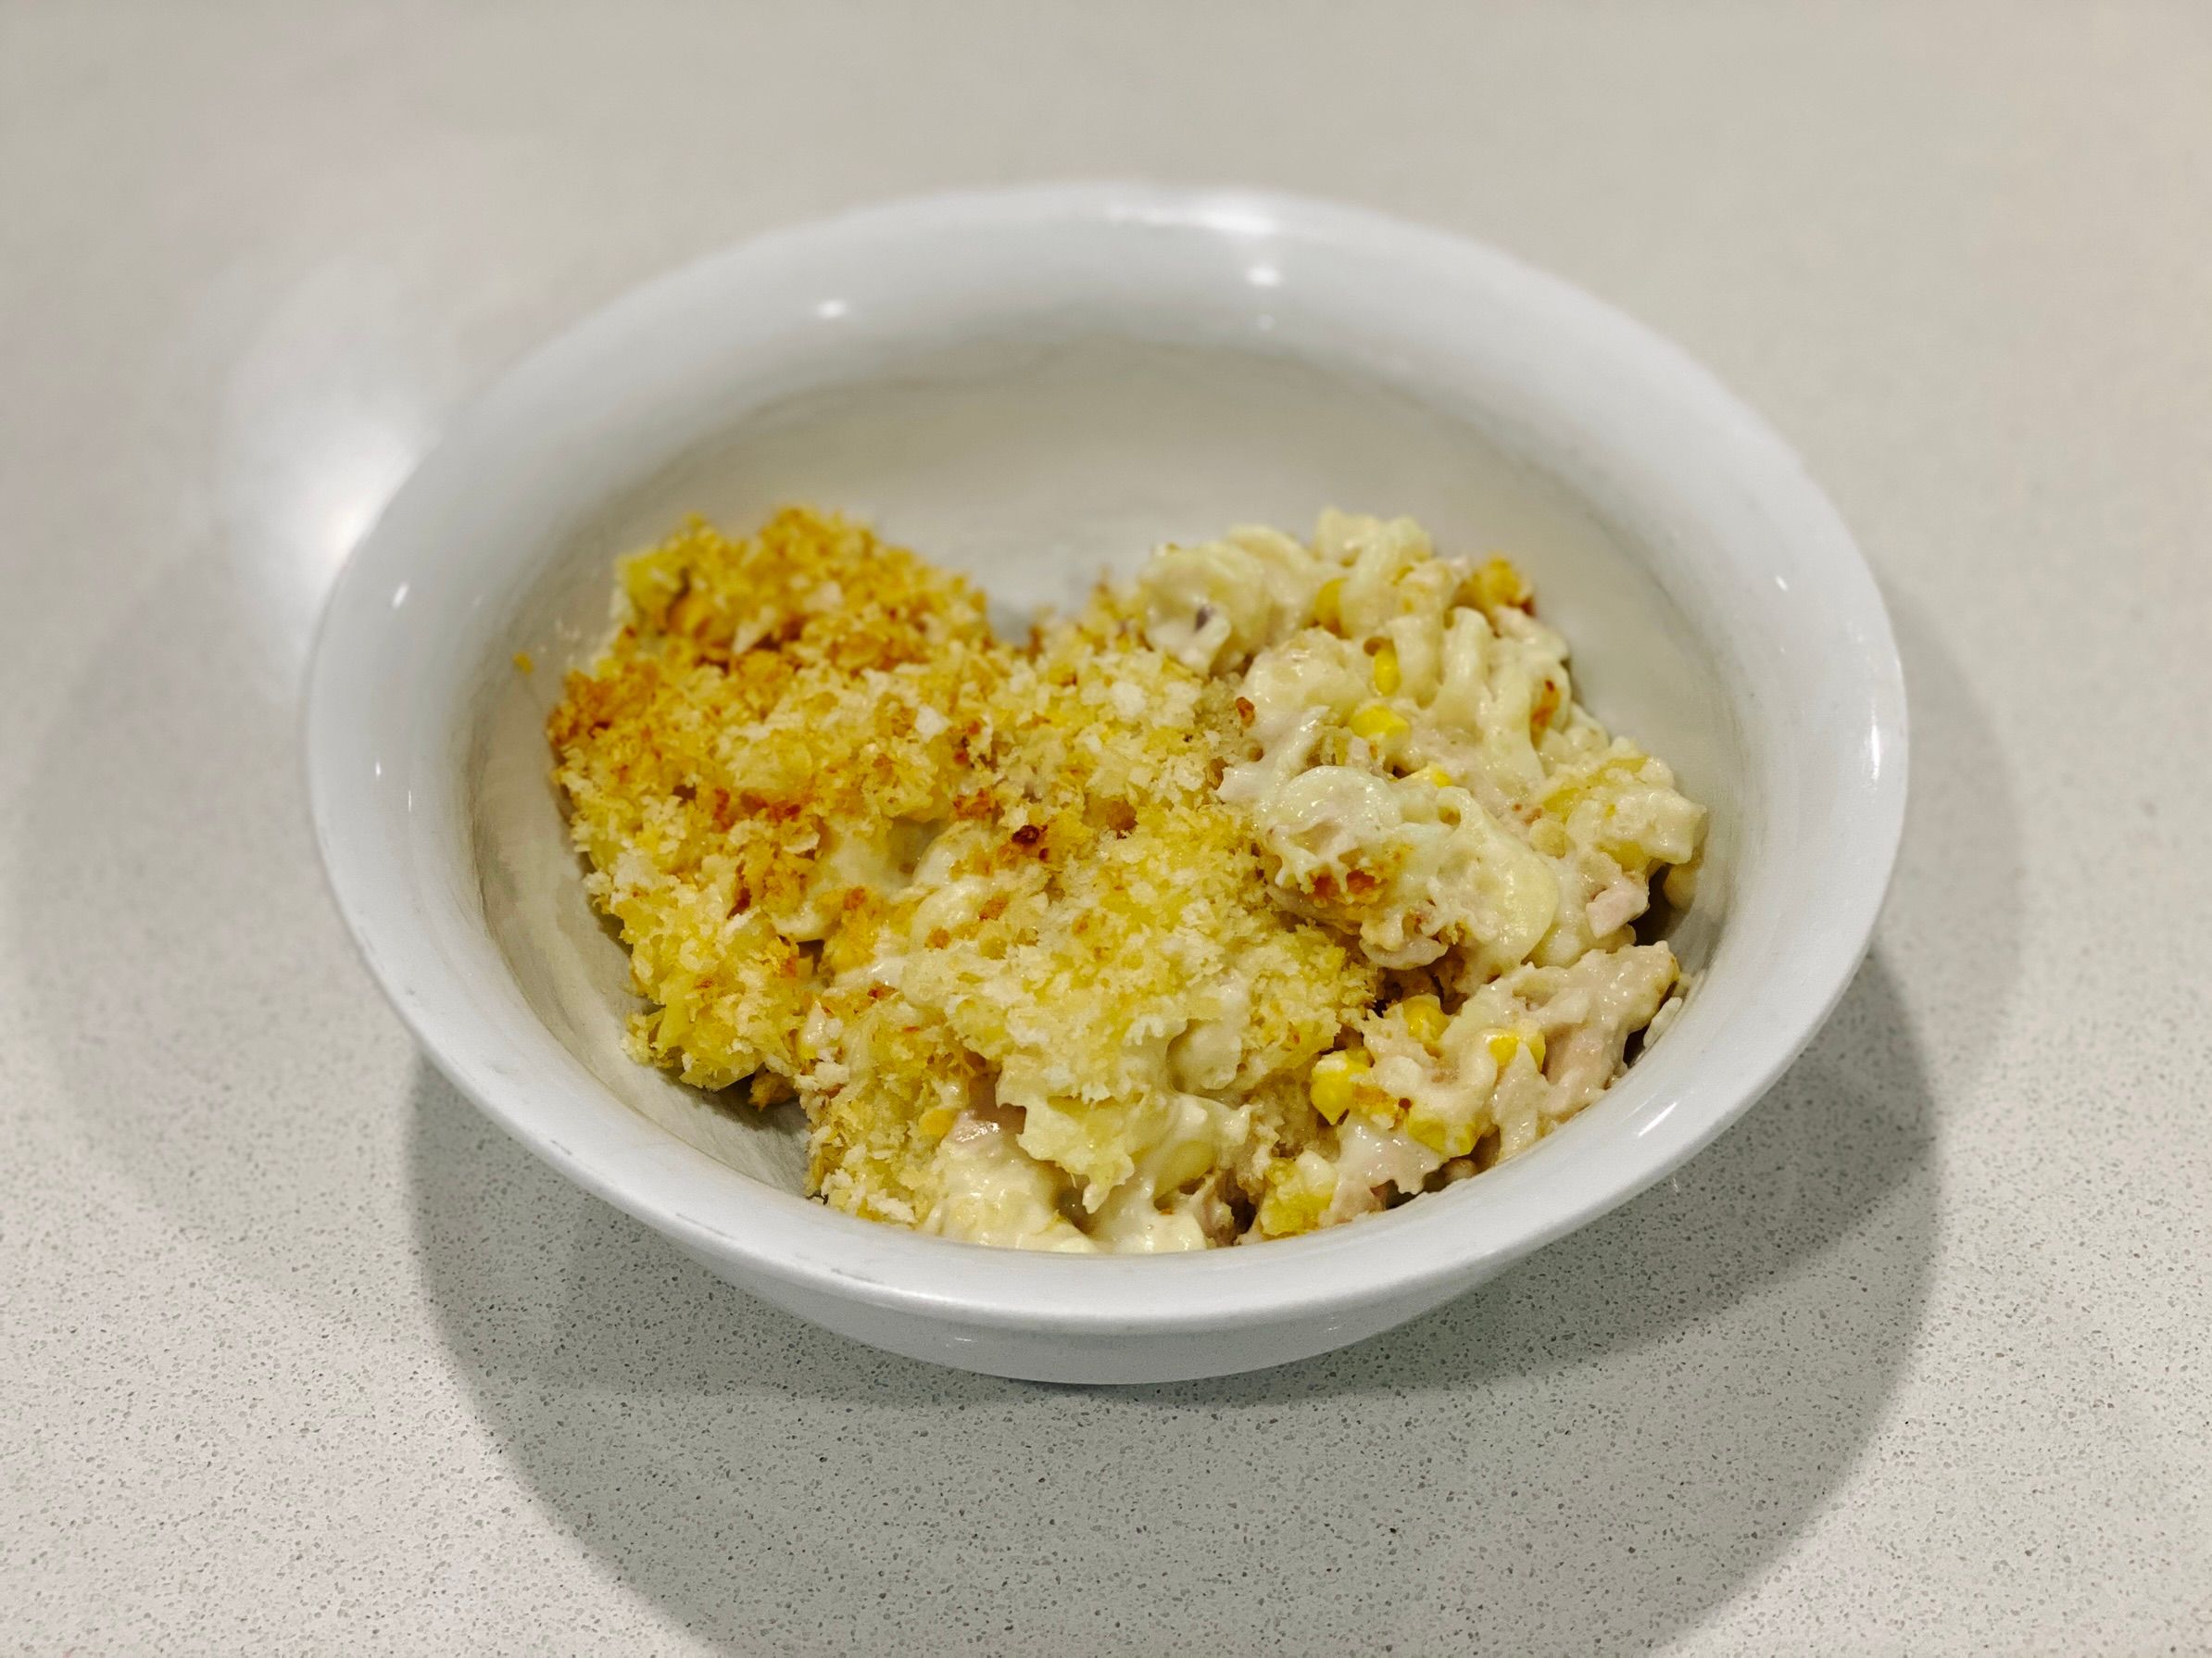 A photo of the tuna mornay in a bowl. Here you can see that underneath the topping it consists of spiral pasta with chunks of tuna and pieces of corn in a thick white sauce.